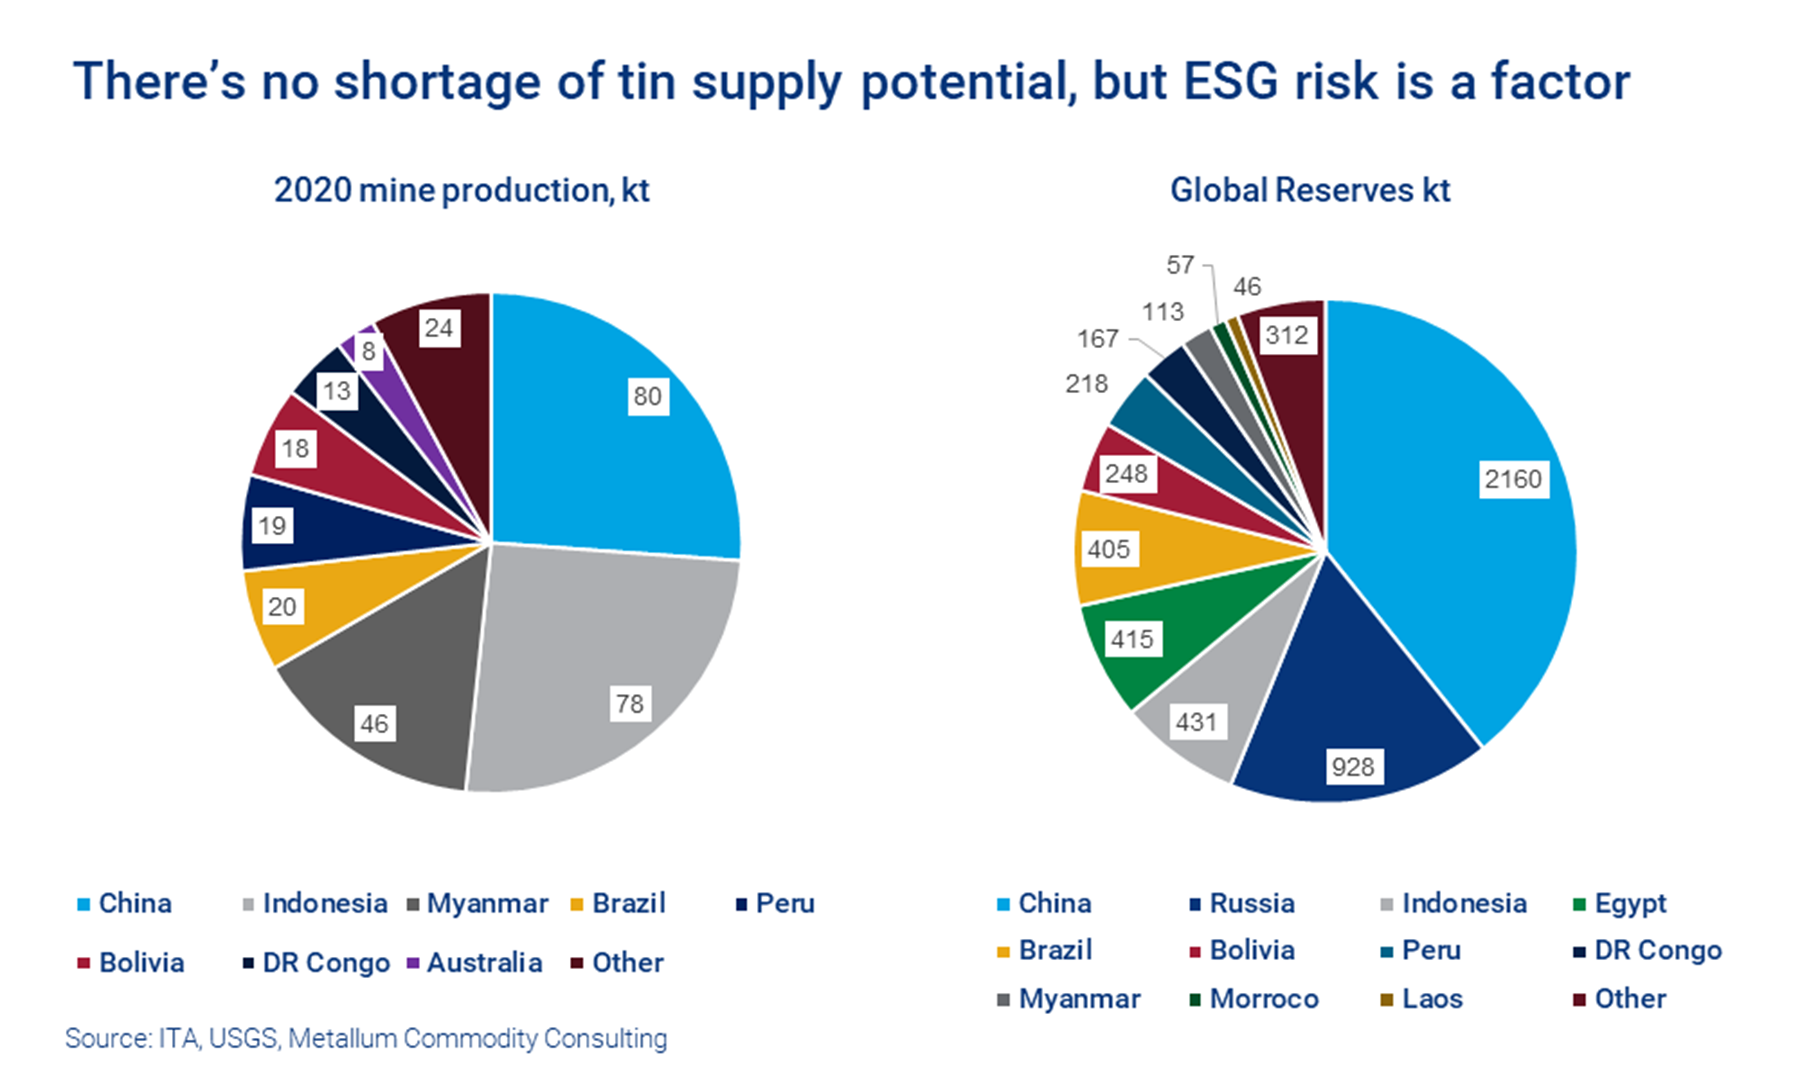 Chart shows there's no shortage of tin supply potential, but ESG risk is a factor 